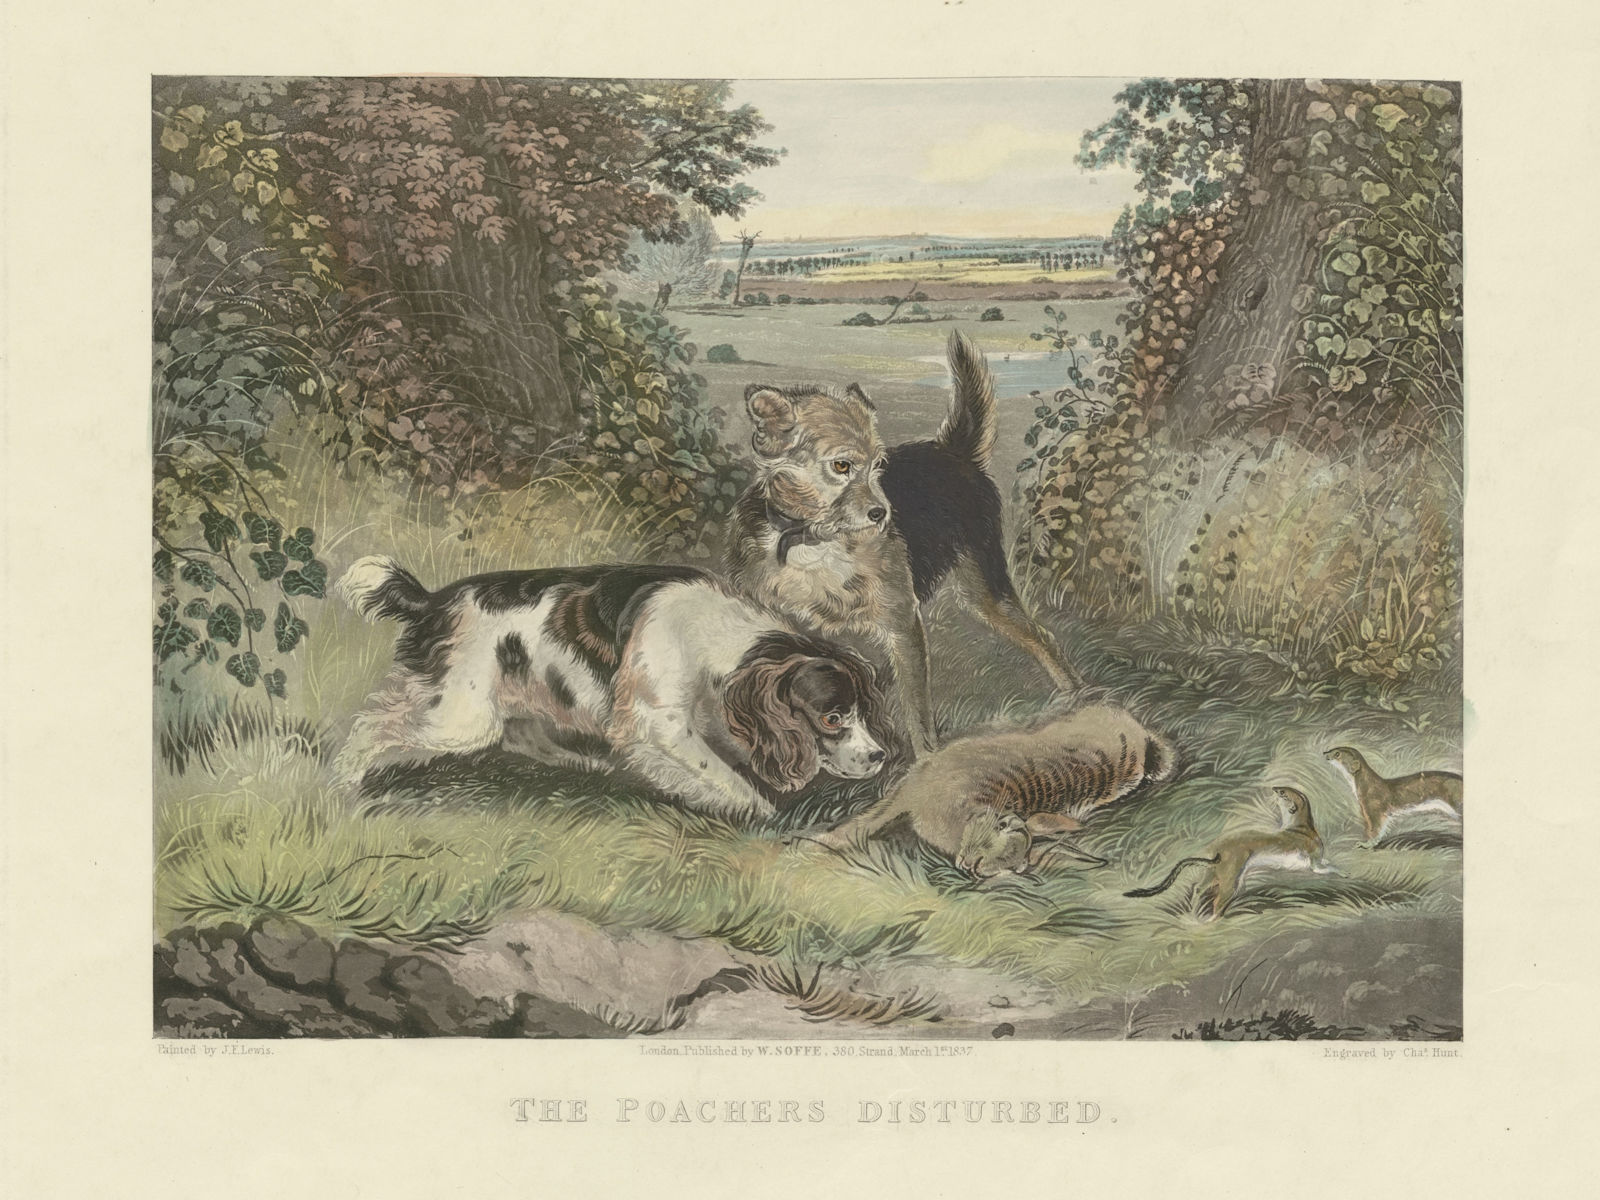 "The poachers disturbed", by J.F.Lewis. Soffe. Dogs, rabbit & stoat 1837 print